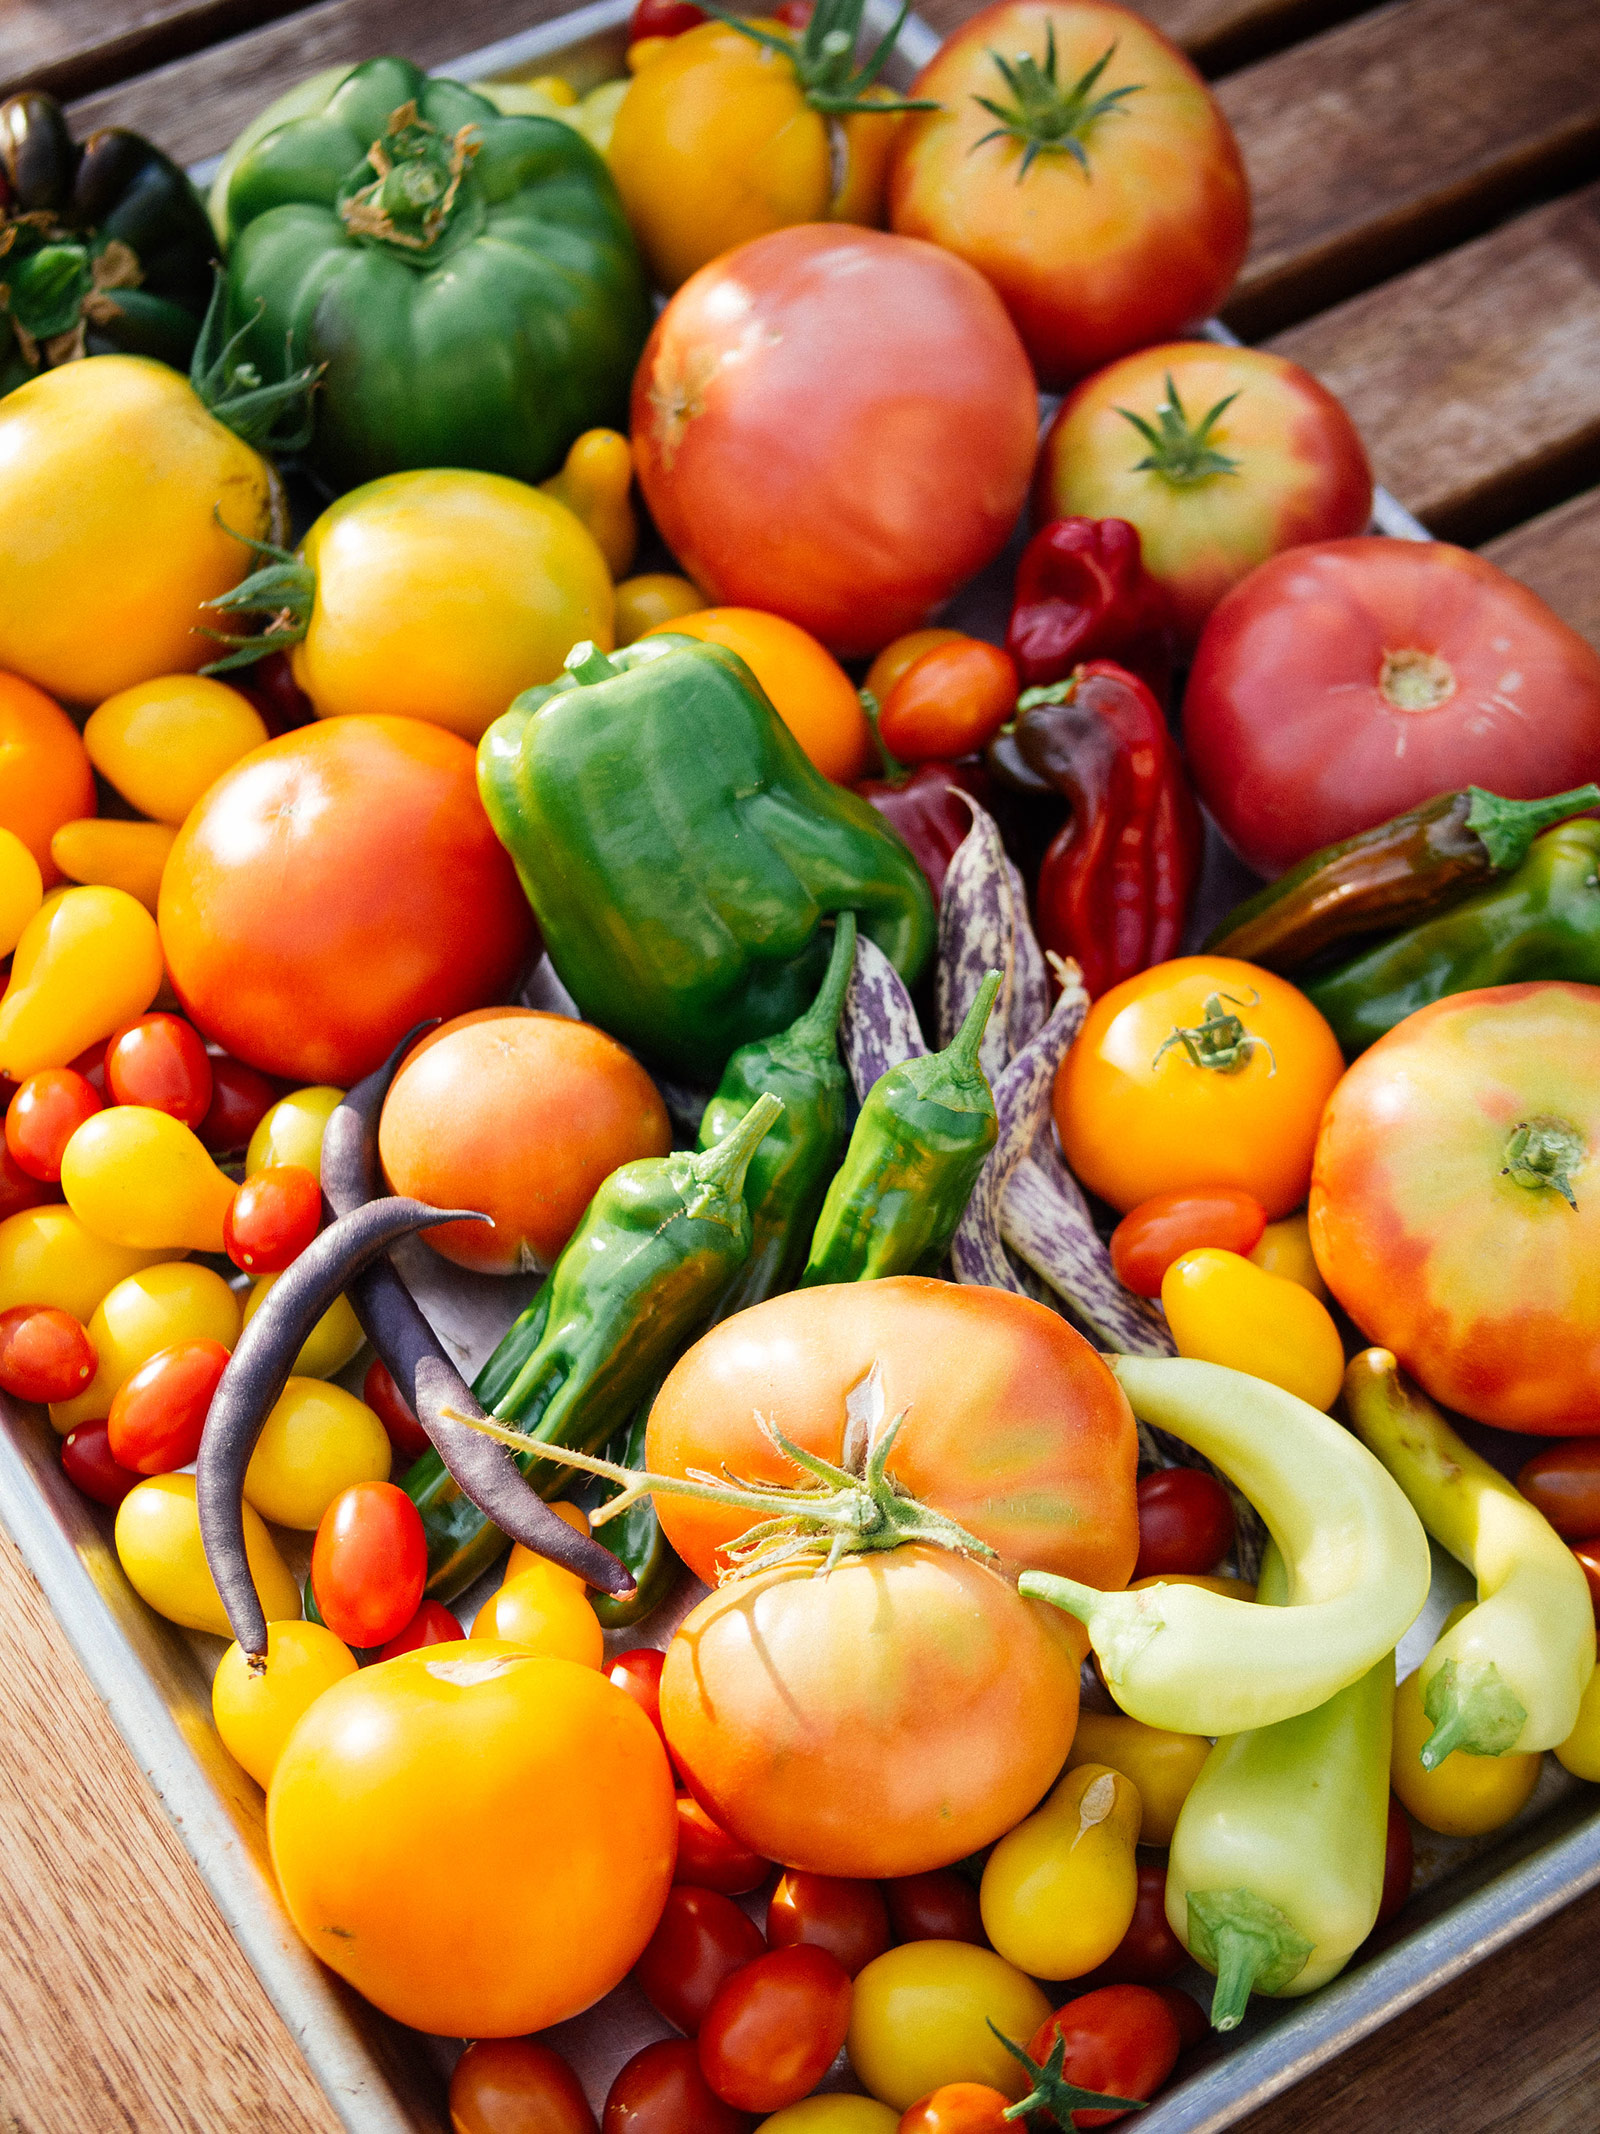 A tray full of homegrown, freshly harvested tomatoes, peppers, and beans in an array of colors